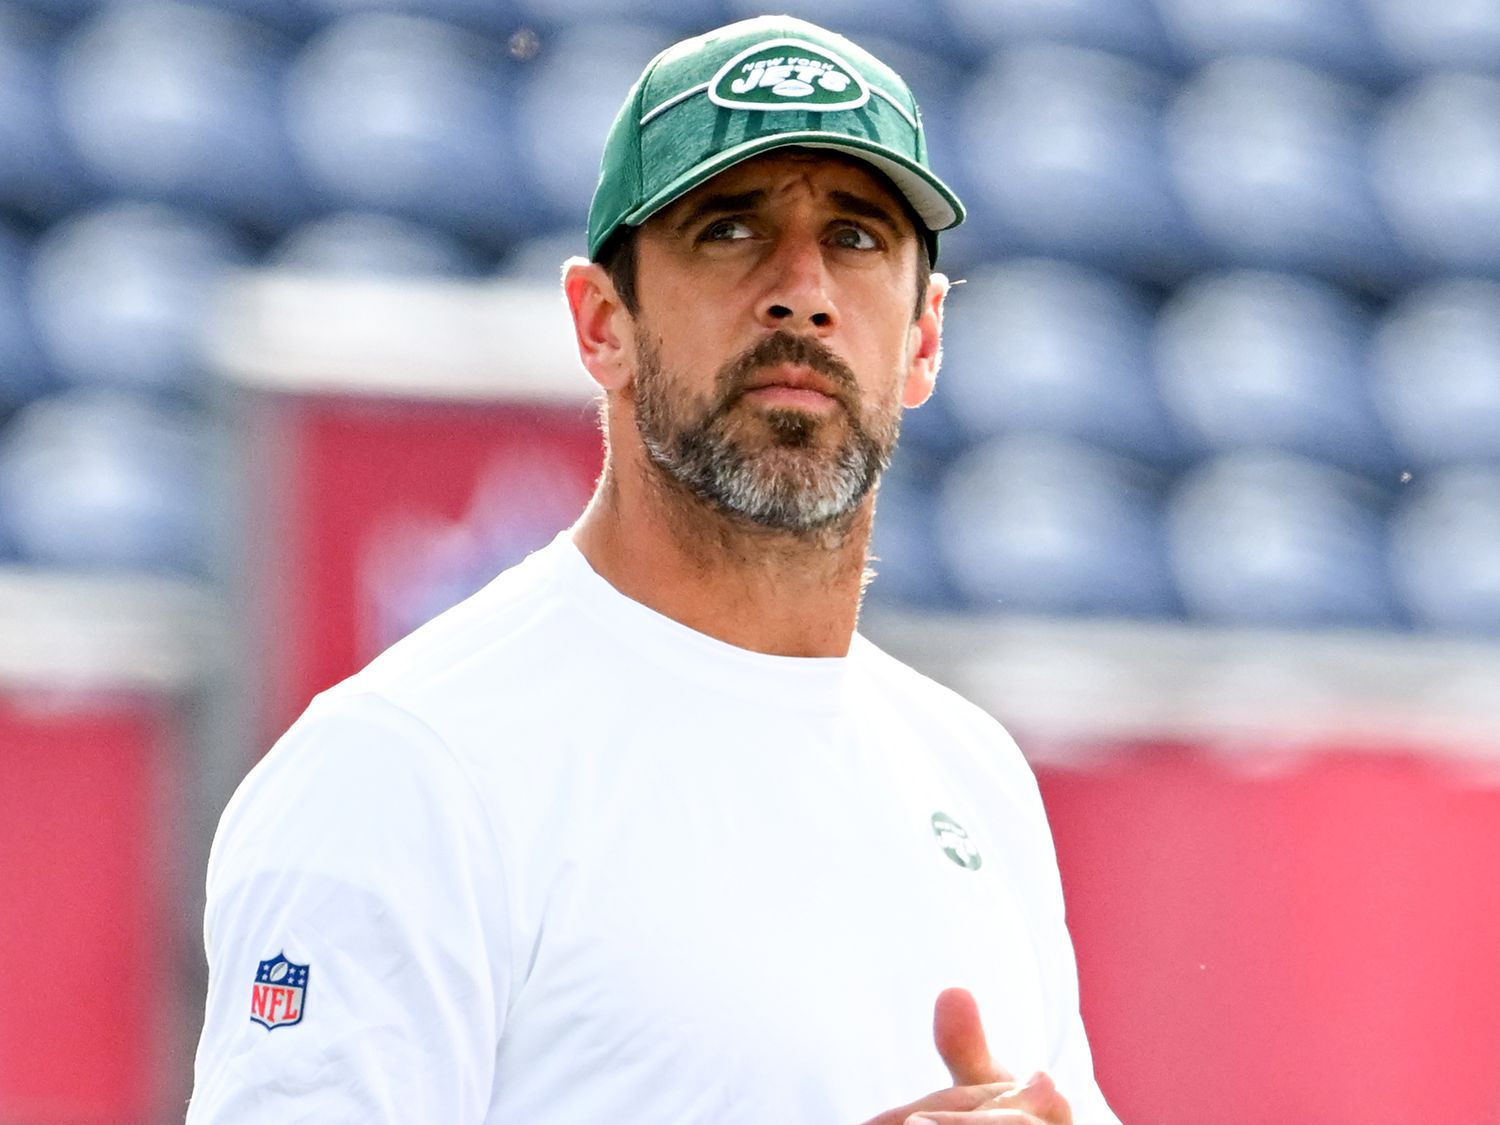 Aaron Rodgers Voted Jets’ Most Inspirational Player Despite Limited Playing Time